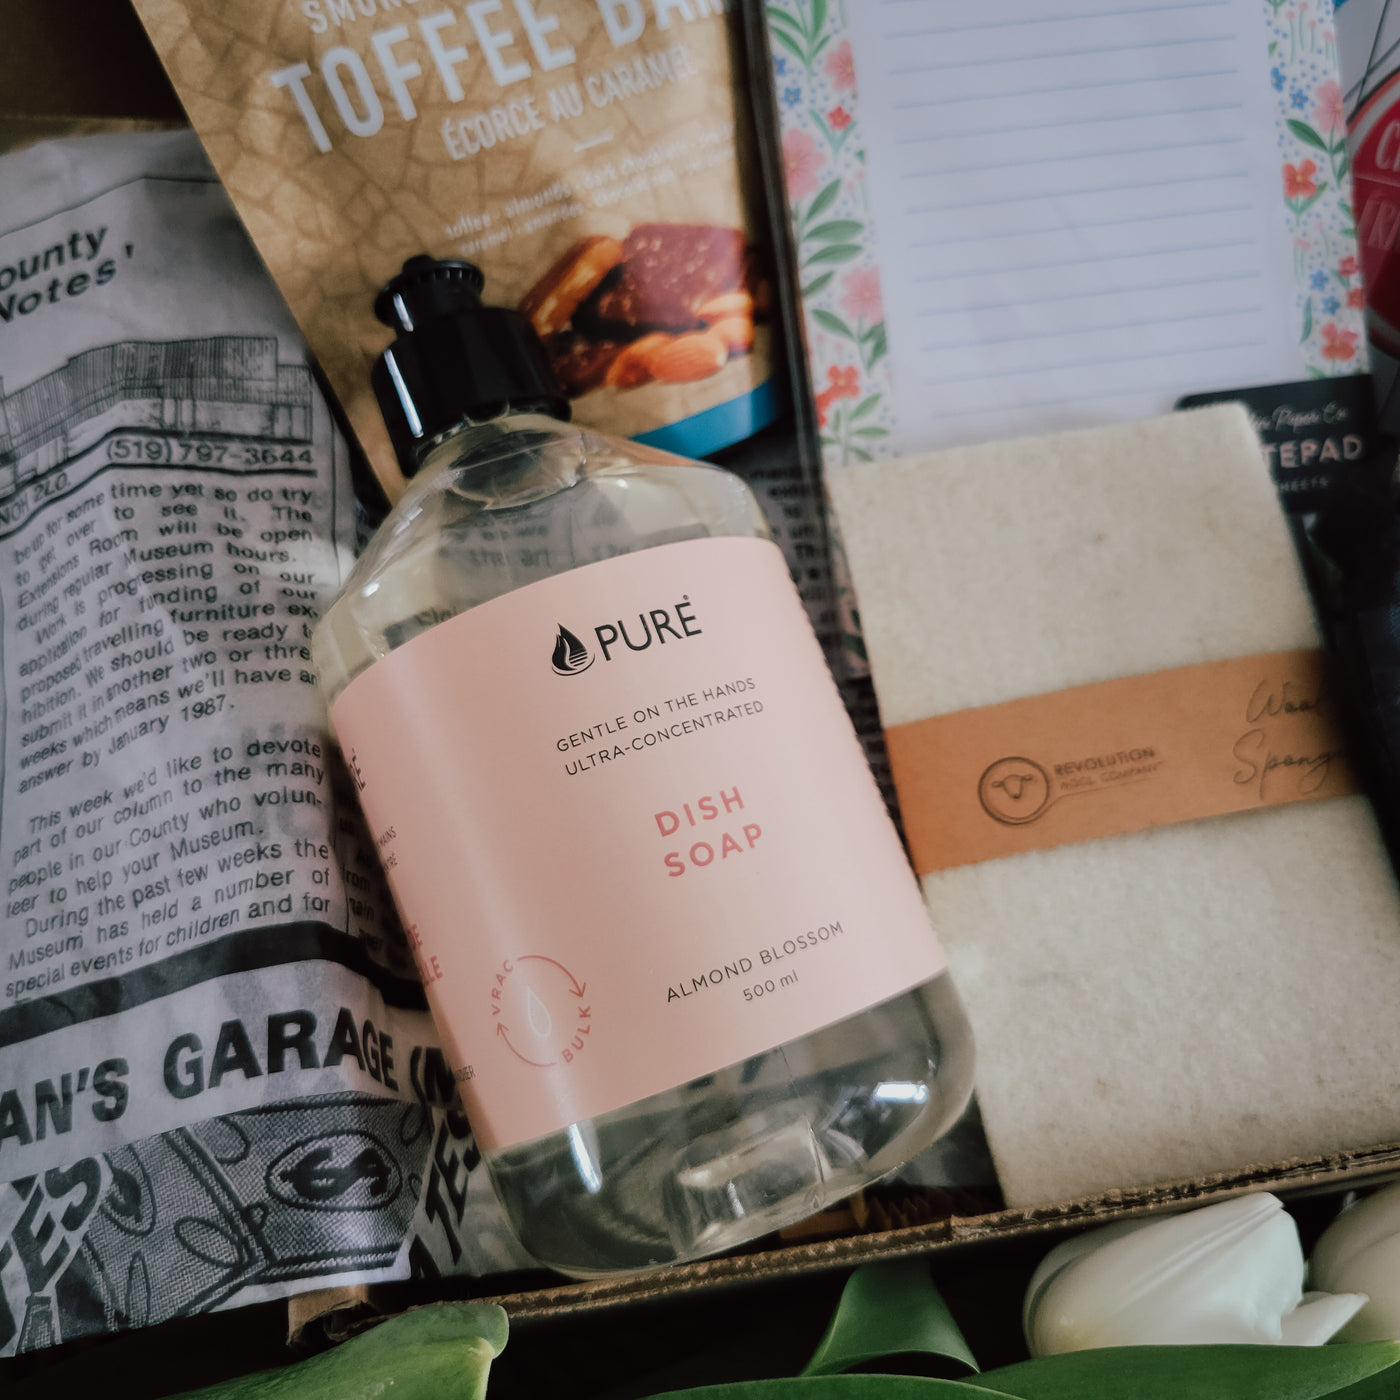 Acre75 Gathered Review - Canadian Subscription Boxes